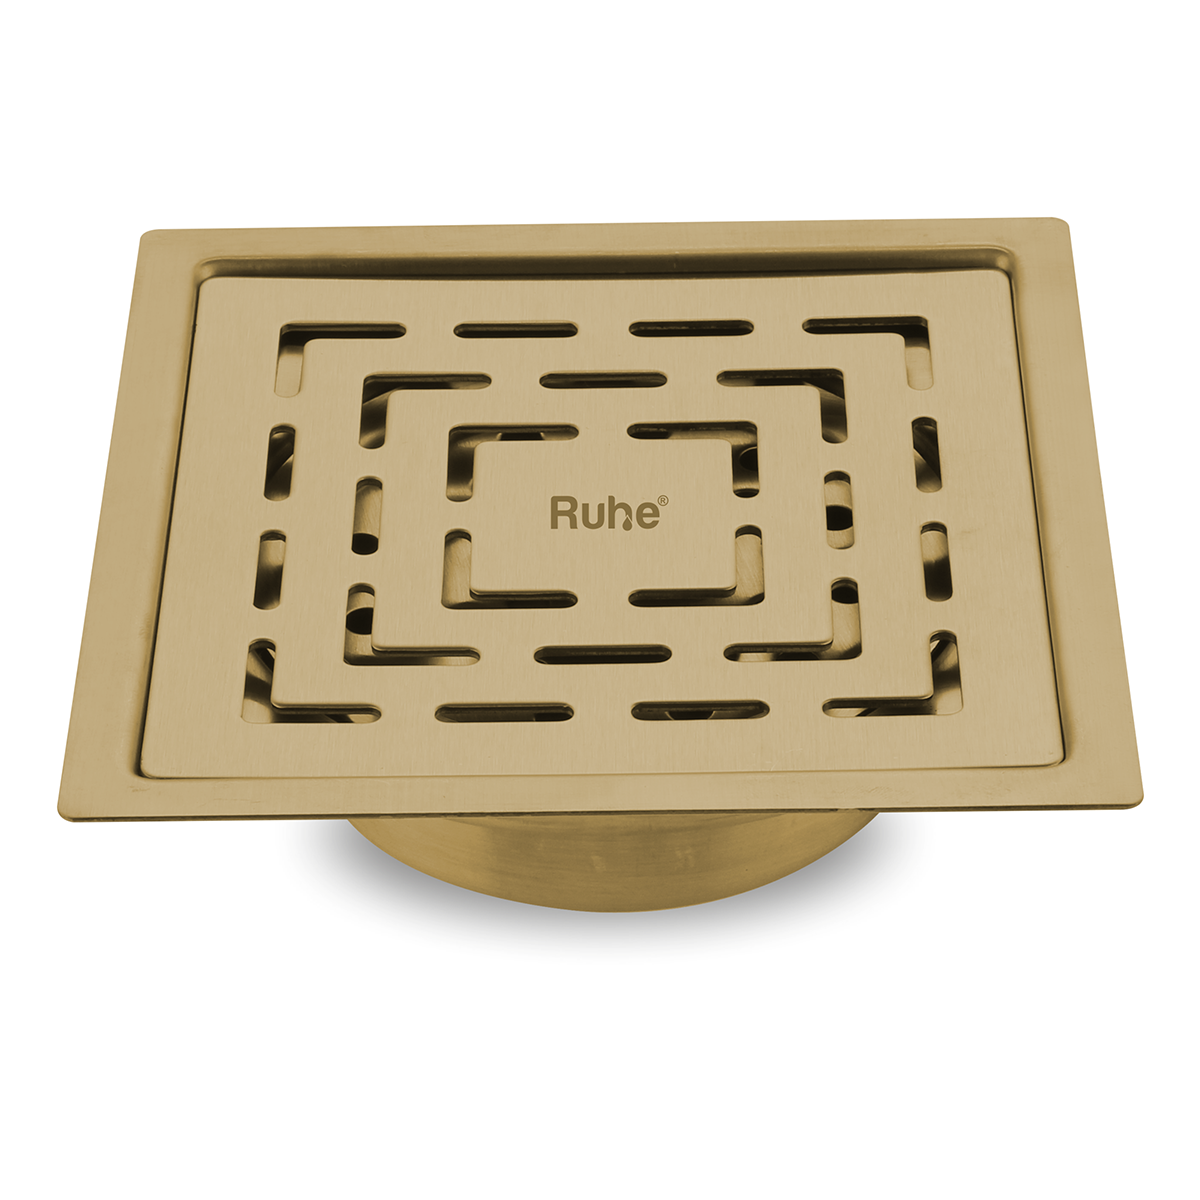 Sapphire Square Flat Cut Floor Drain in Yellow Gold PVD Coating (5 x 5 Inches)